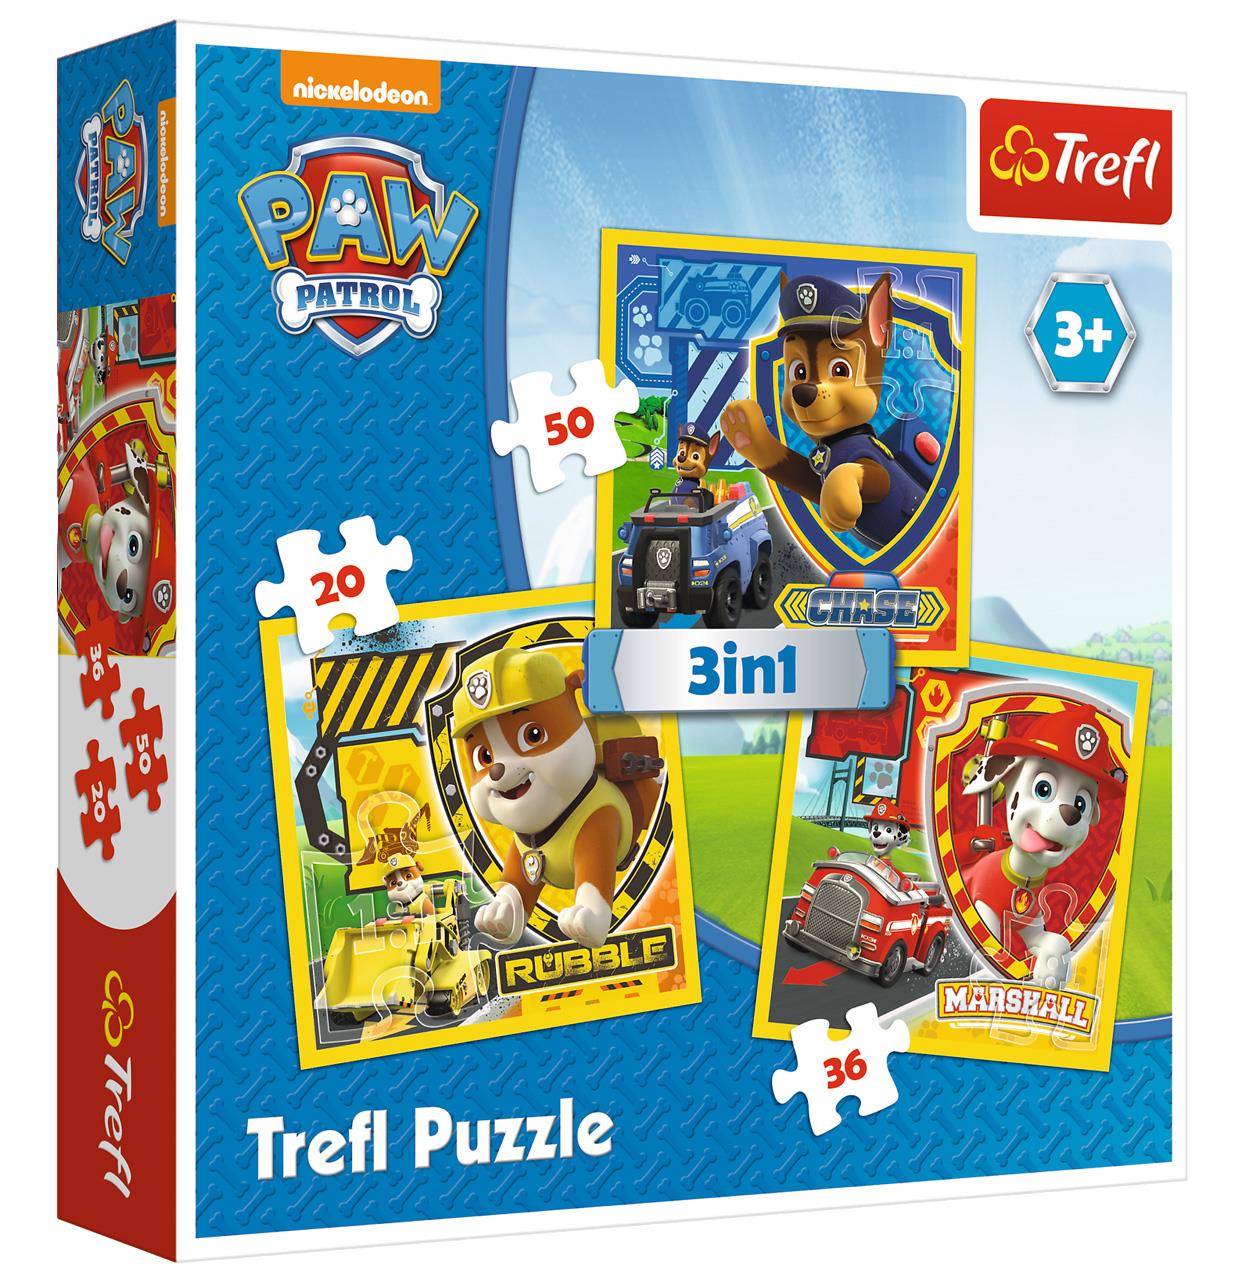 Trefl Çocuk Puzzle 34839 Marshall, Rubble And Chase, Paw Patrol 20+36+50 Parça 3 in 1 Puzzle